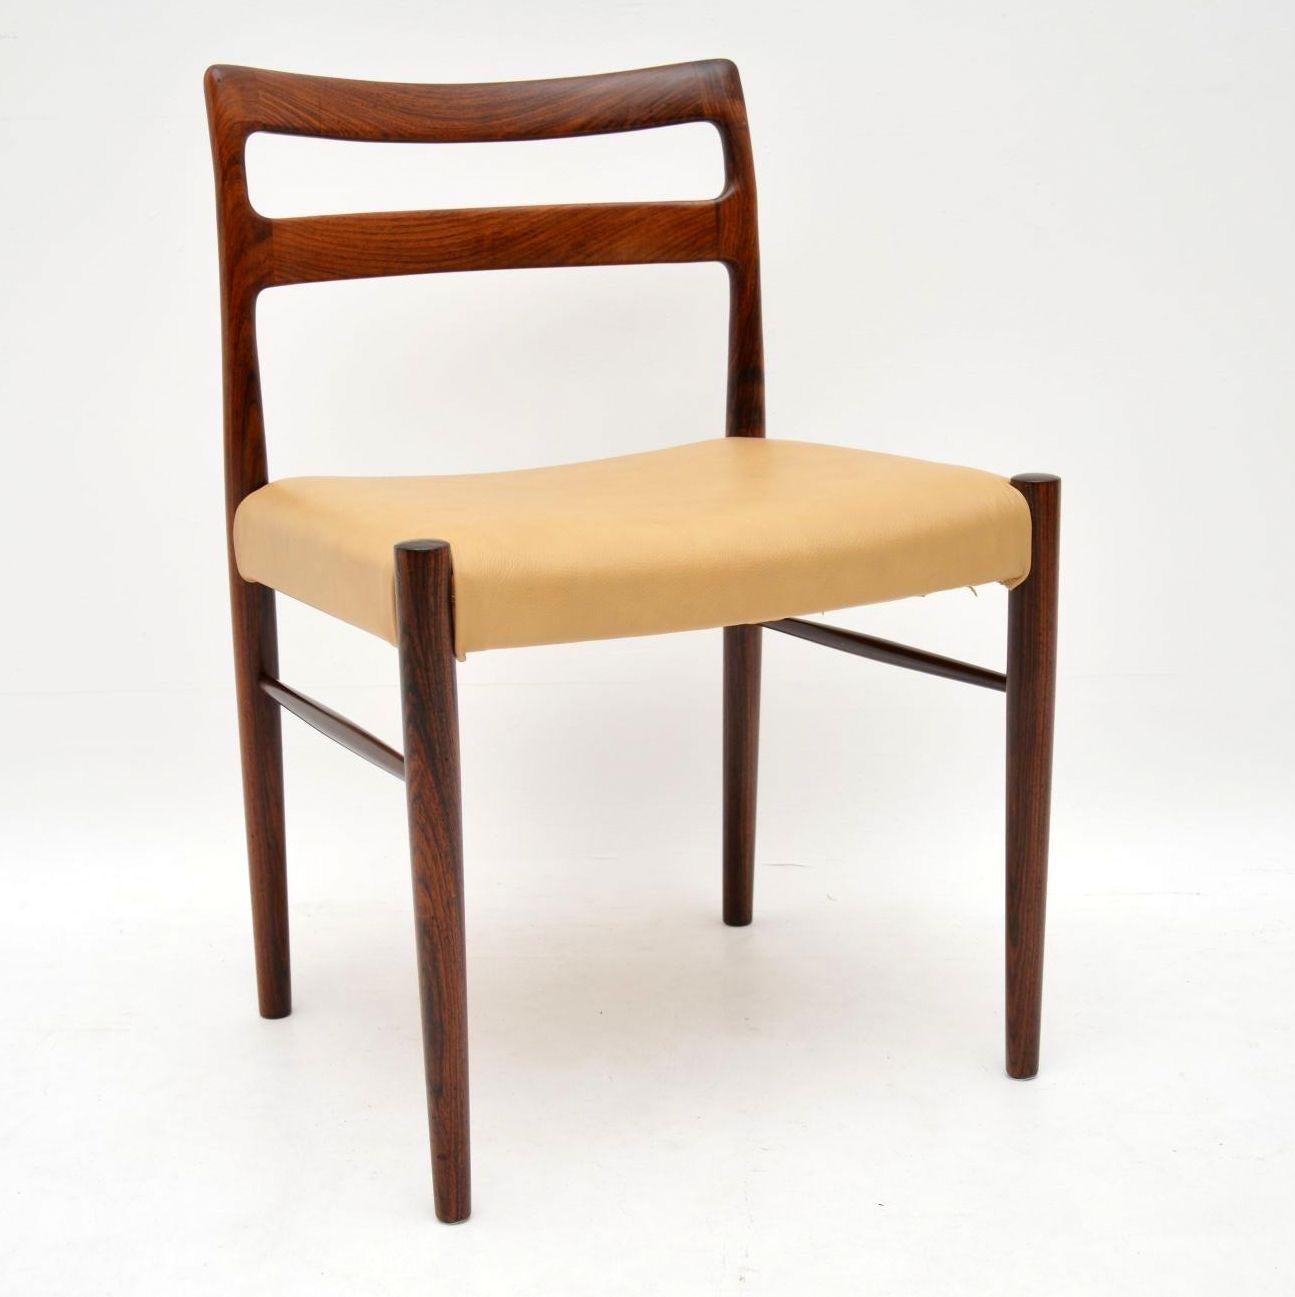 A stunning and extremely rare set of Danish solid wood dining chairs with leather seats, these were made by Soren Willasden in the 1960s. They are in superb condition throughout, the frames are nicely polished, sturdy and sound with a gorgeous color